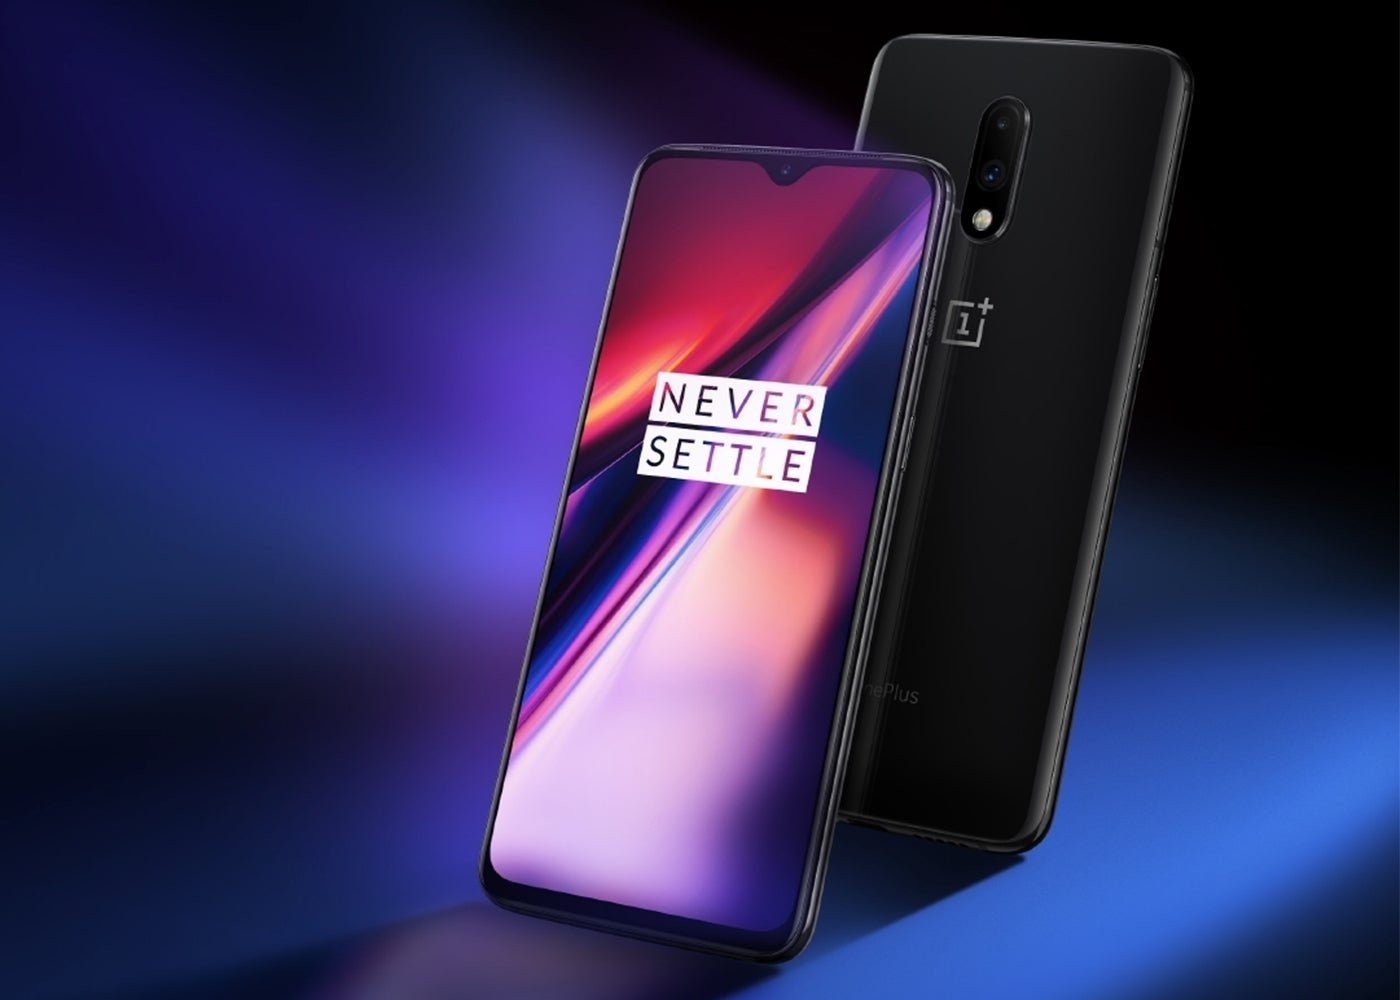 OnePlus 7, frontal